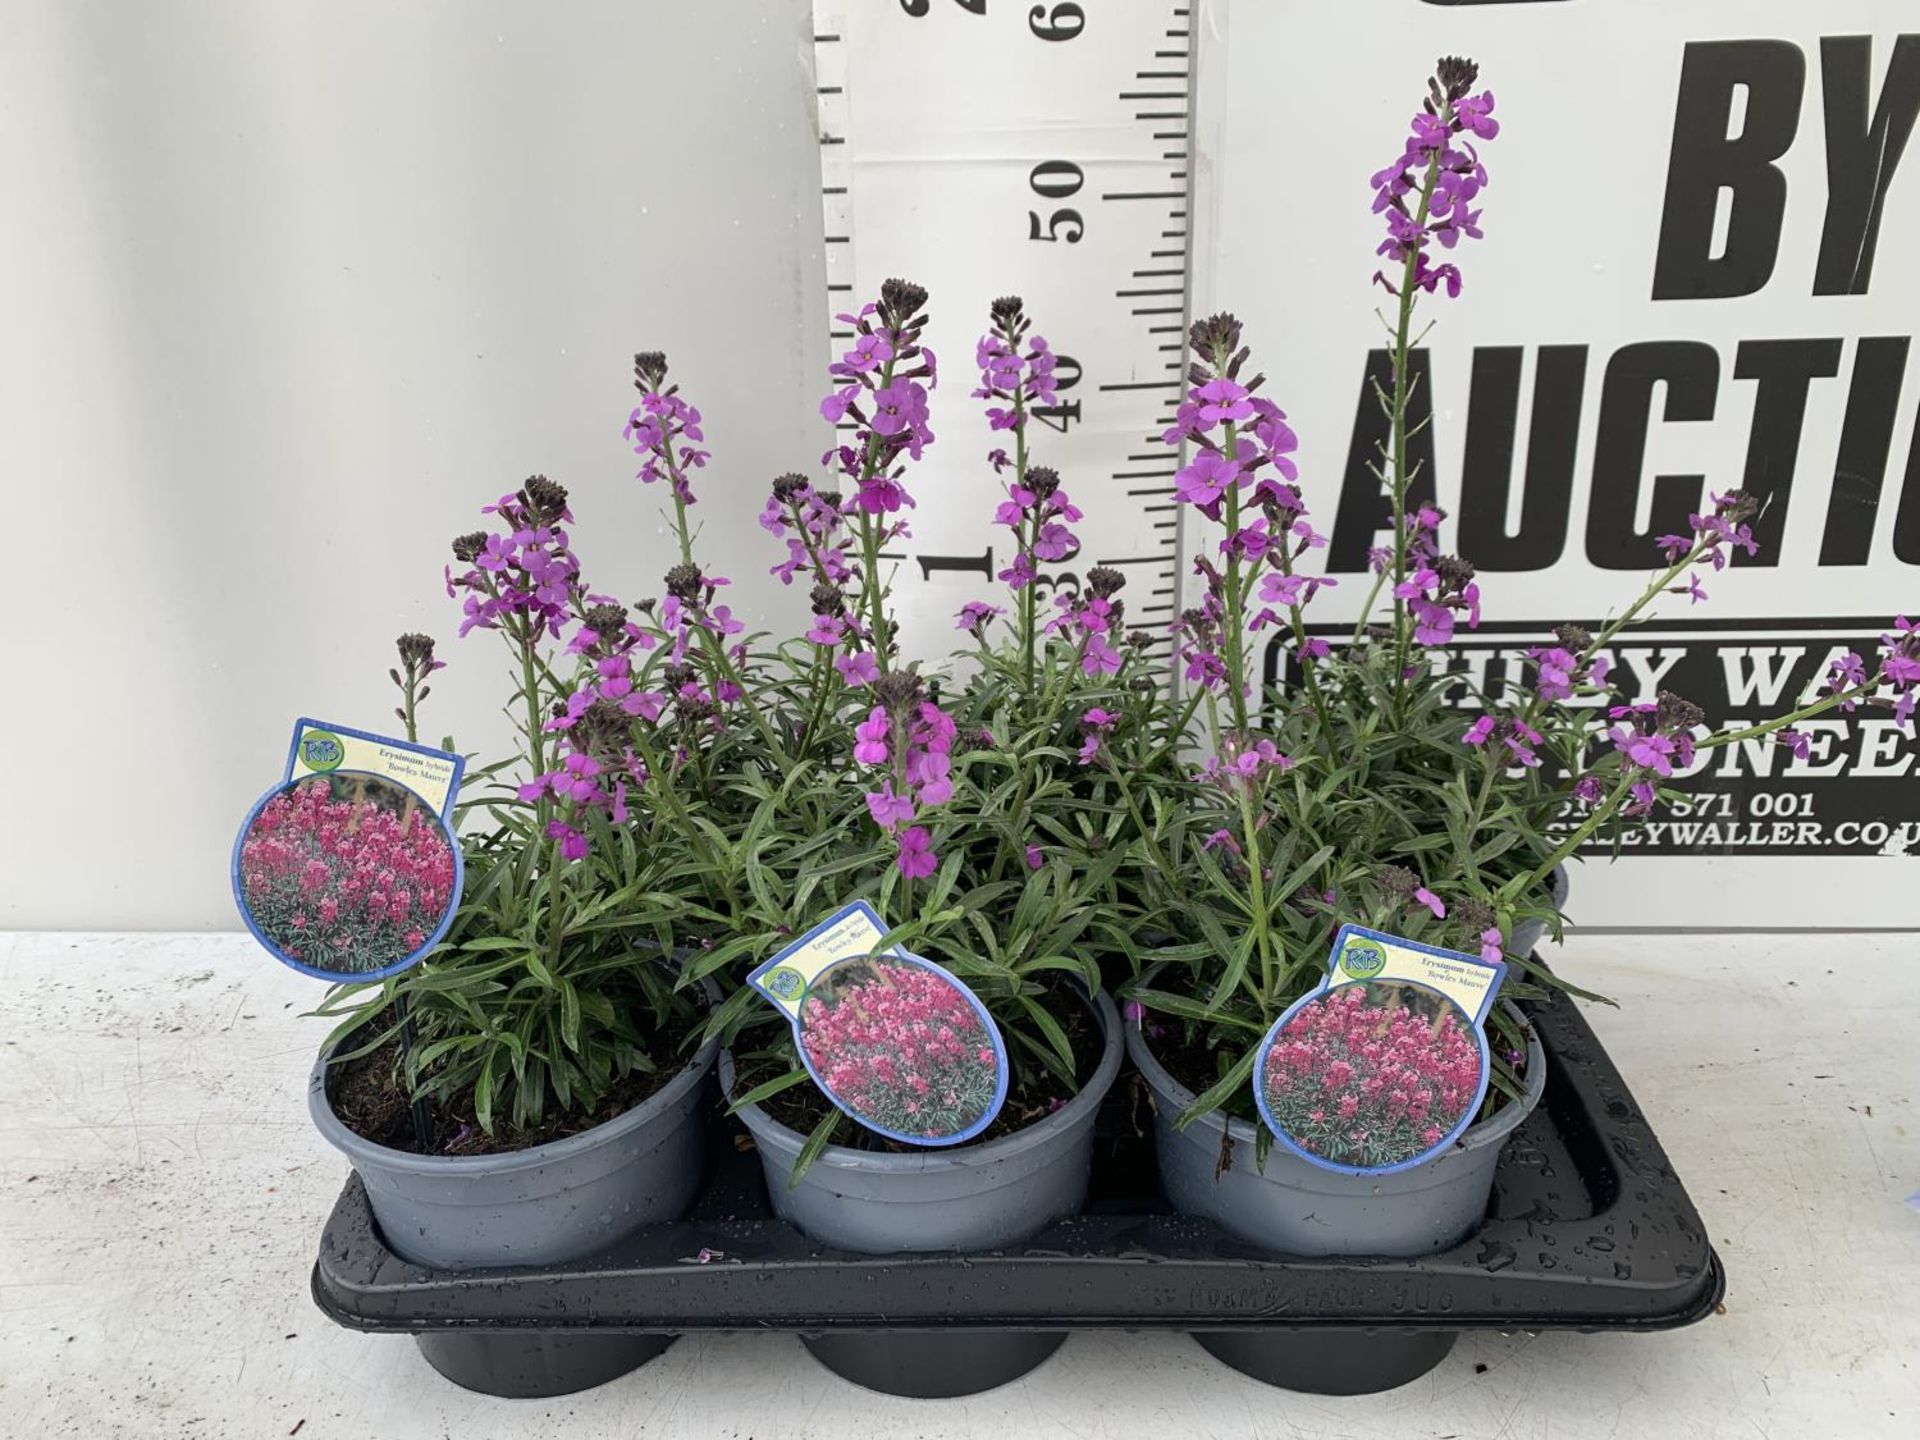 SIX ERYSIMUM BOWLES MAUVE IN 2 LTR POTS 40-50CM TALL TO BE SOLD FOR THE SIX PLUS VAT